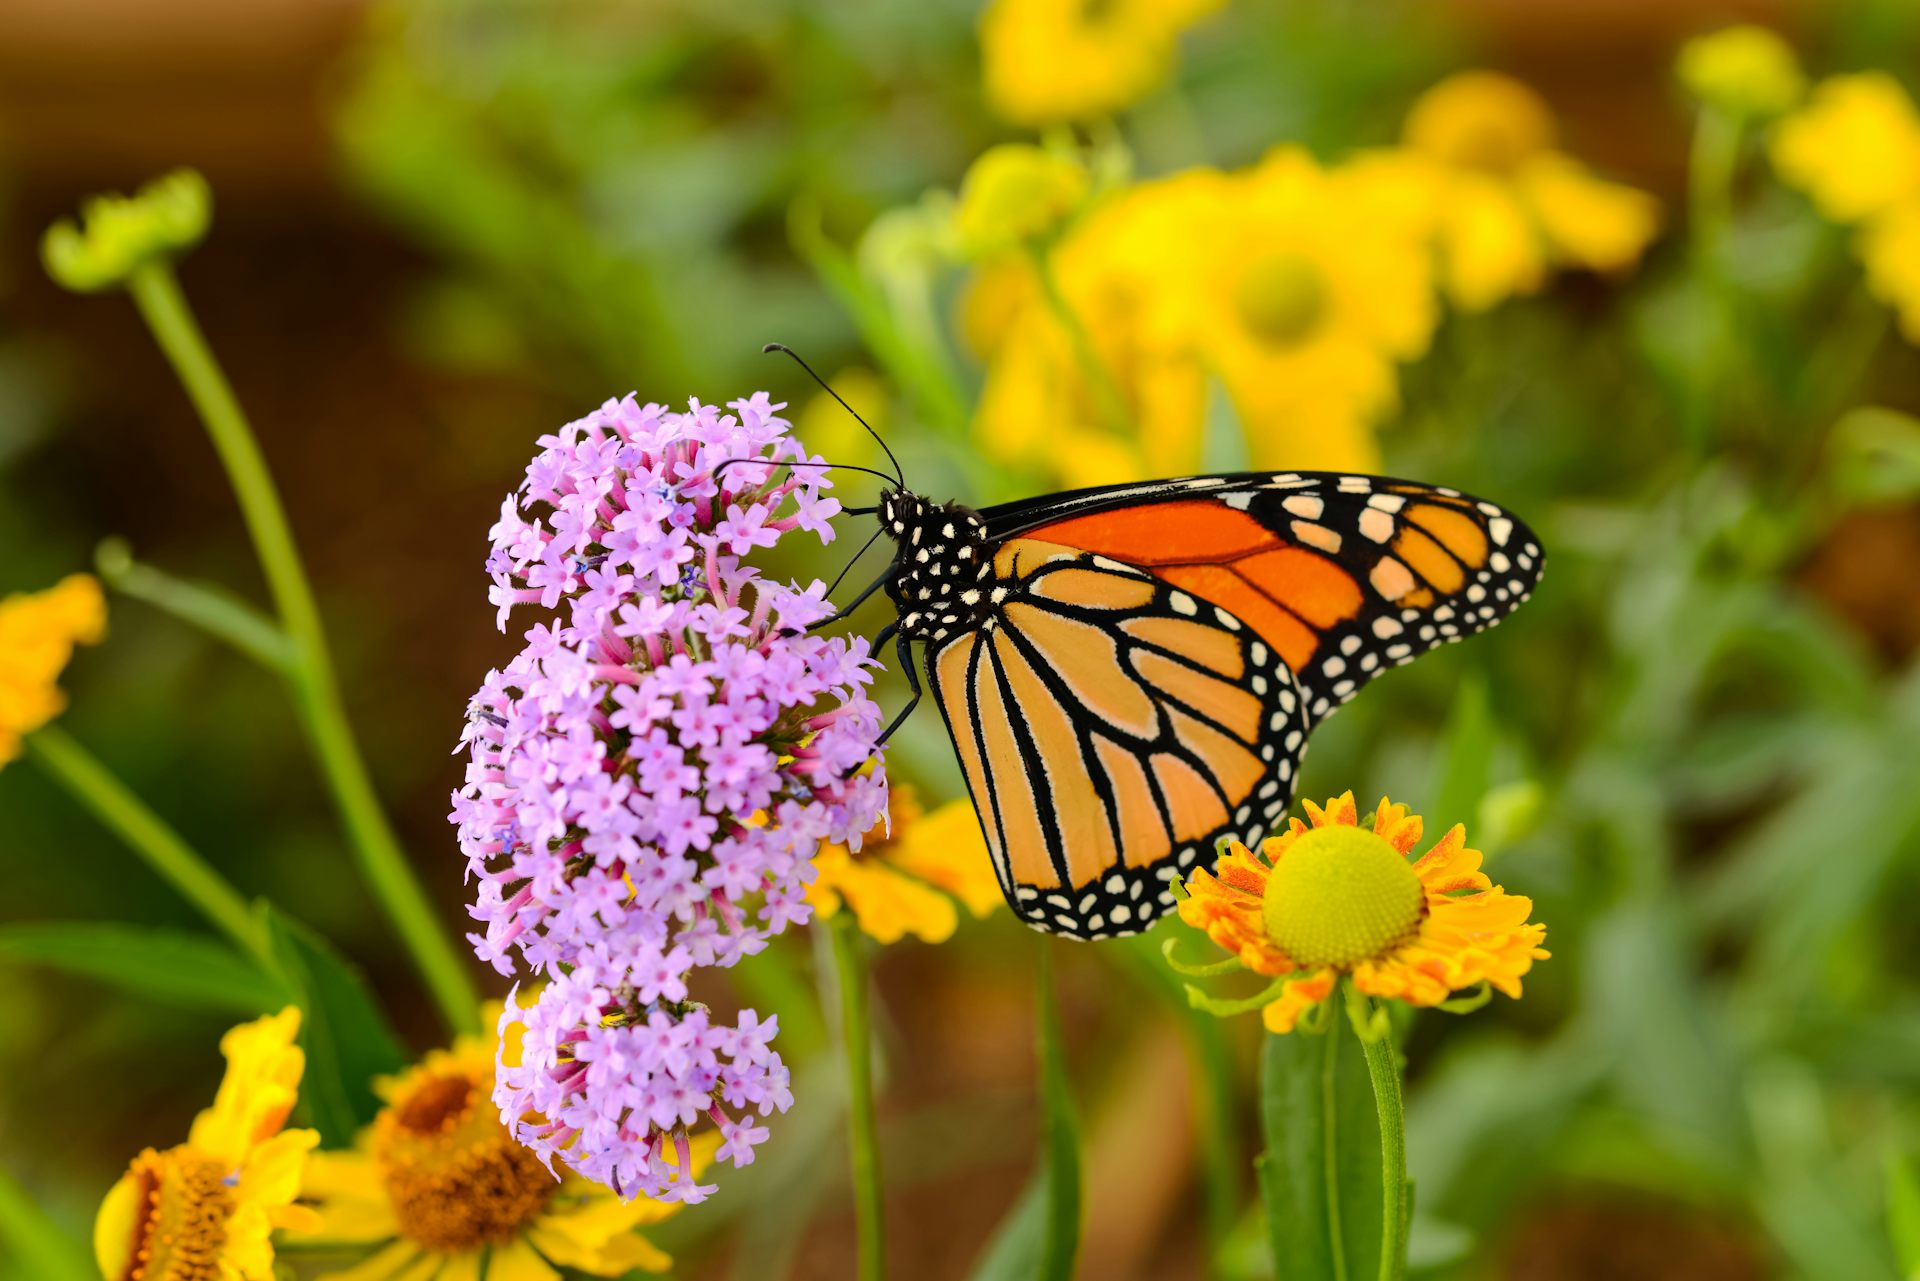 The survival of the endangered monarch butterfly depends on